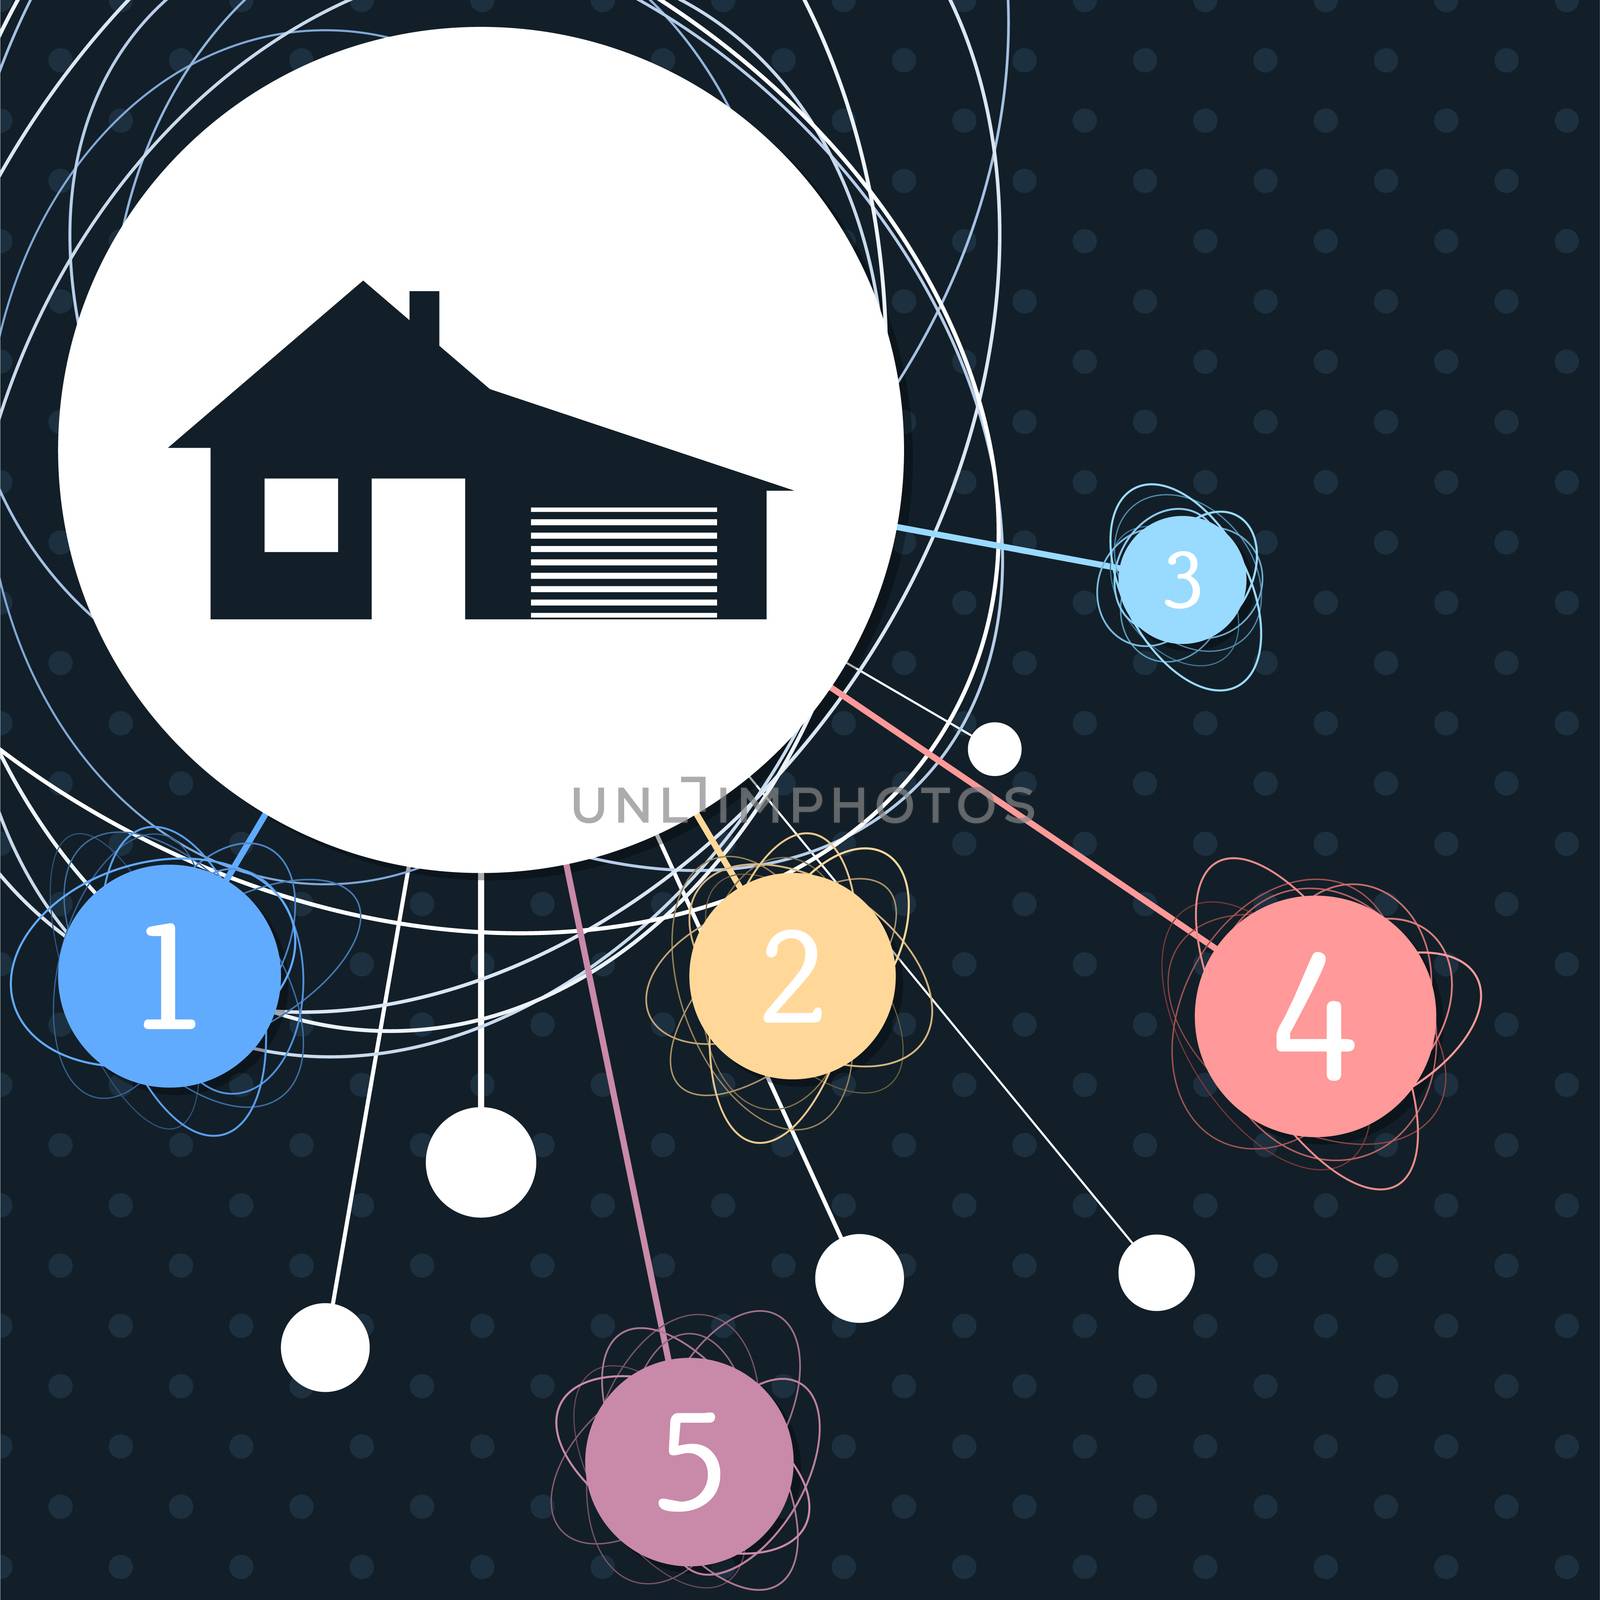 house with garage icon the background to the point and infographic style.  by Adamchuk